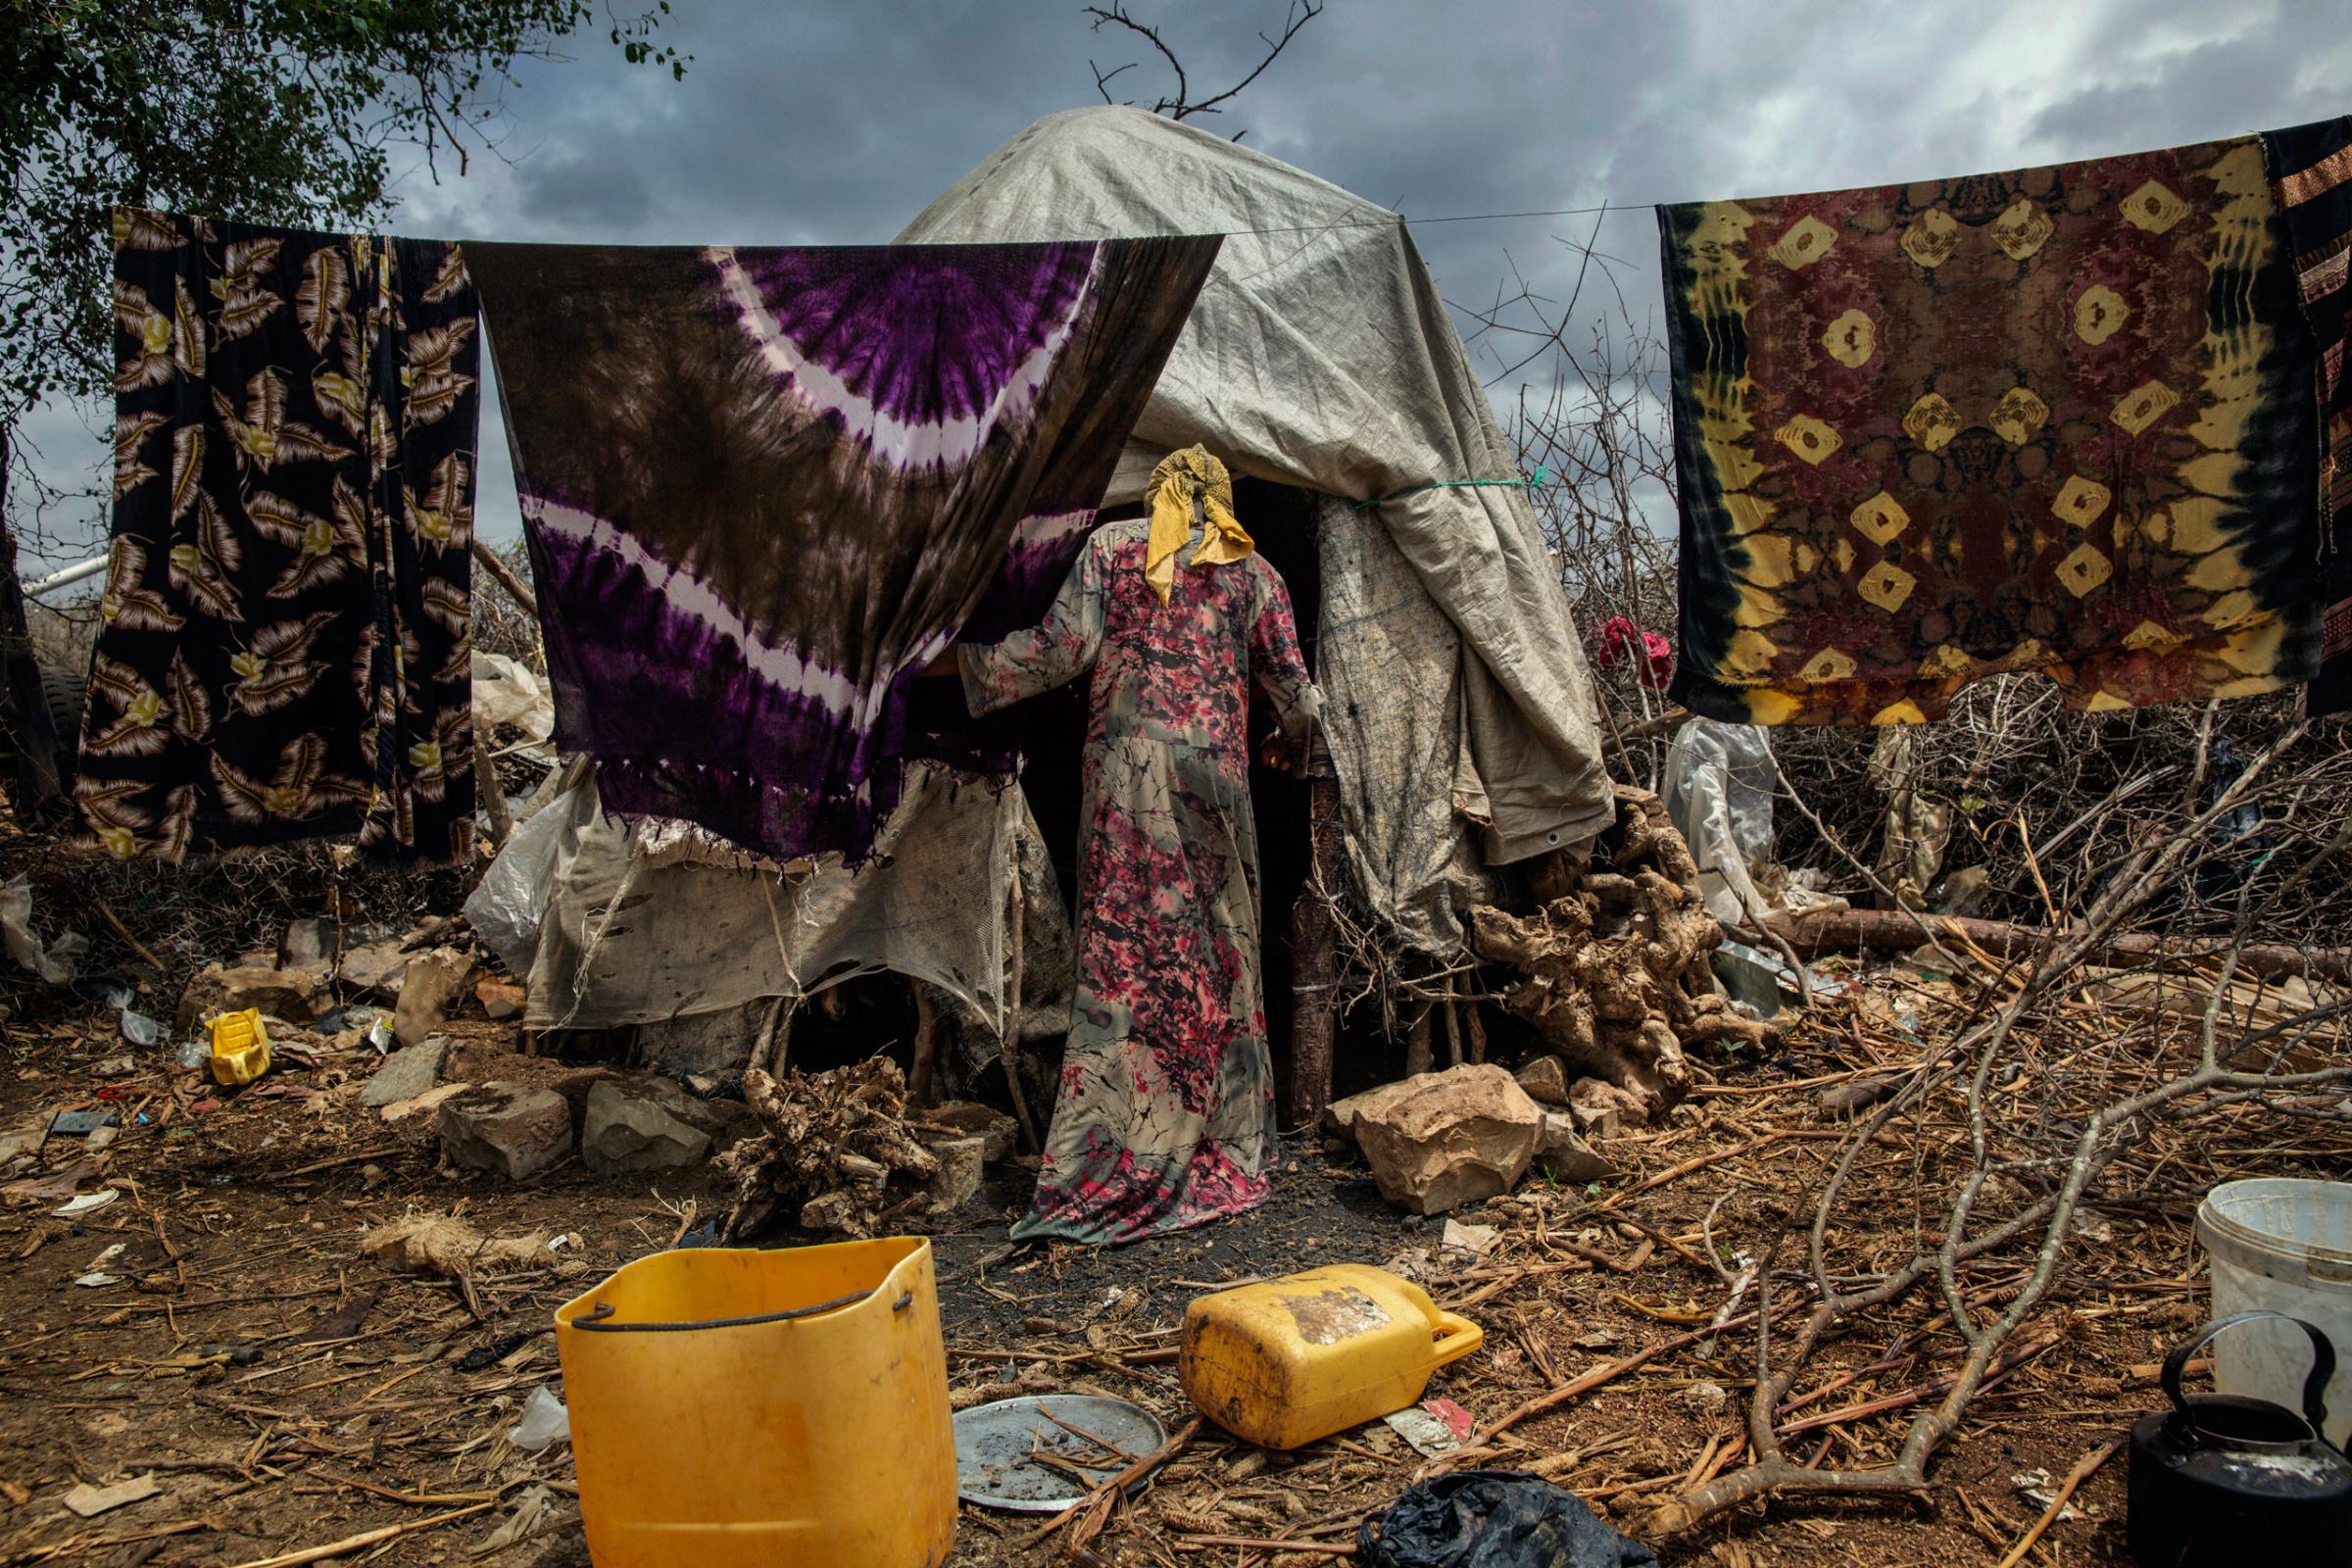 An internally displaced Somali woman walks inside a makeshift camp in Baidoa, in the Bay region, 150 miles from Mogadishu, Somalia. The internally displaced families fled to Baidoa town to escape famine in the surrounding areas. Baidoa, Somalia. October 14, 2015.